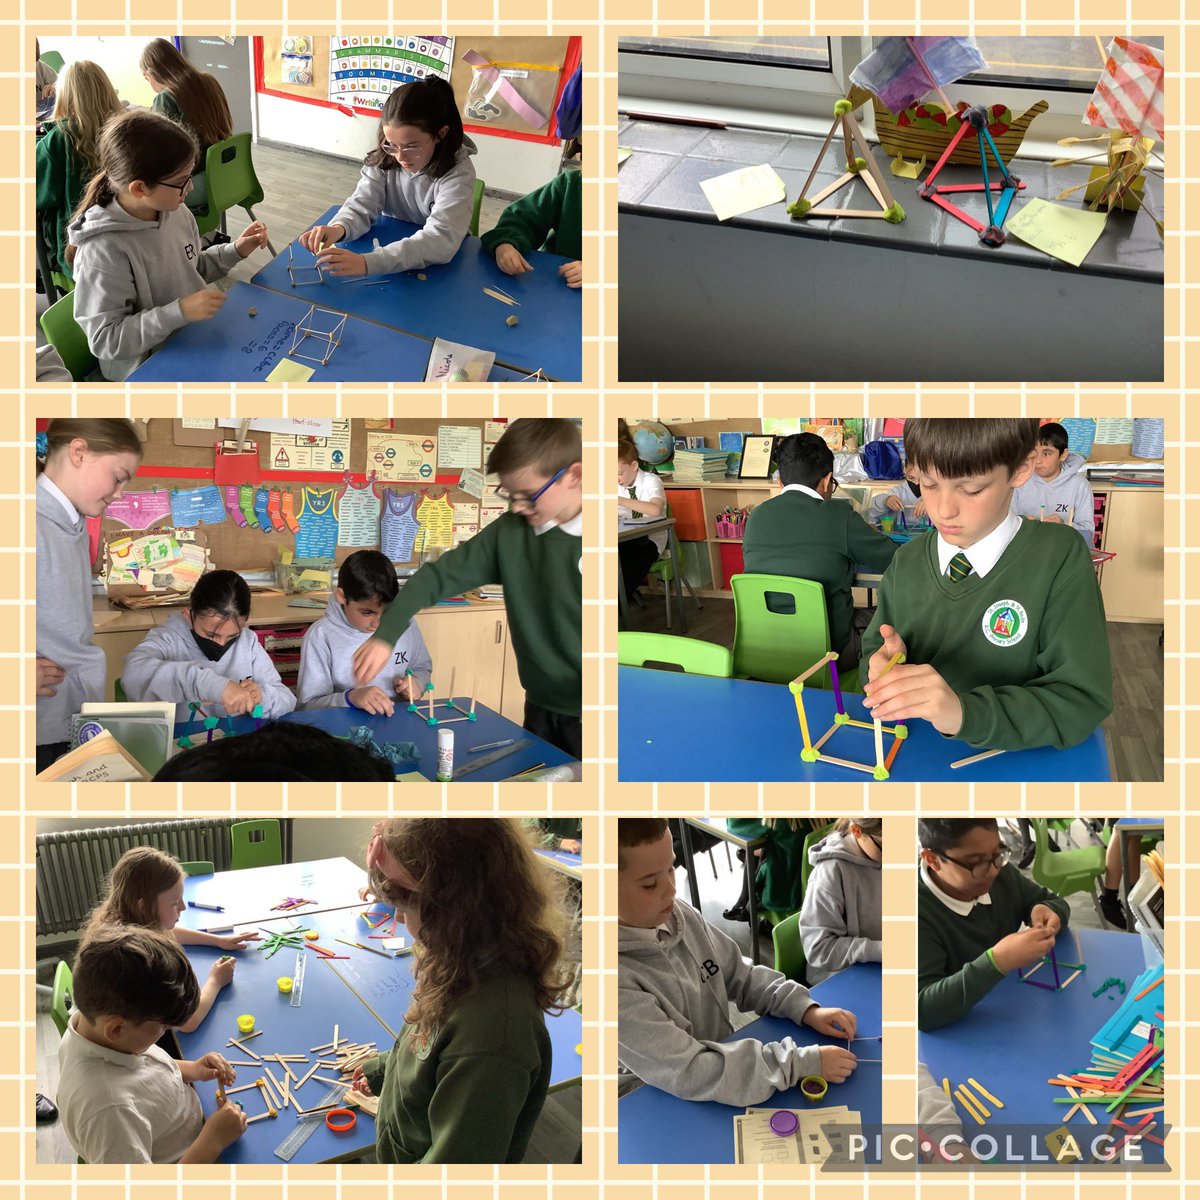 We have been busy building our own 3D shapes this morning and looking at their properties. Lots of collaboration, resilience and hard work. Well done team! #sjsbmaths